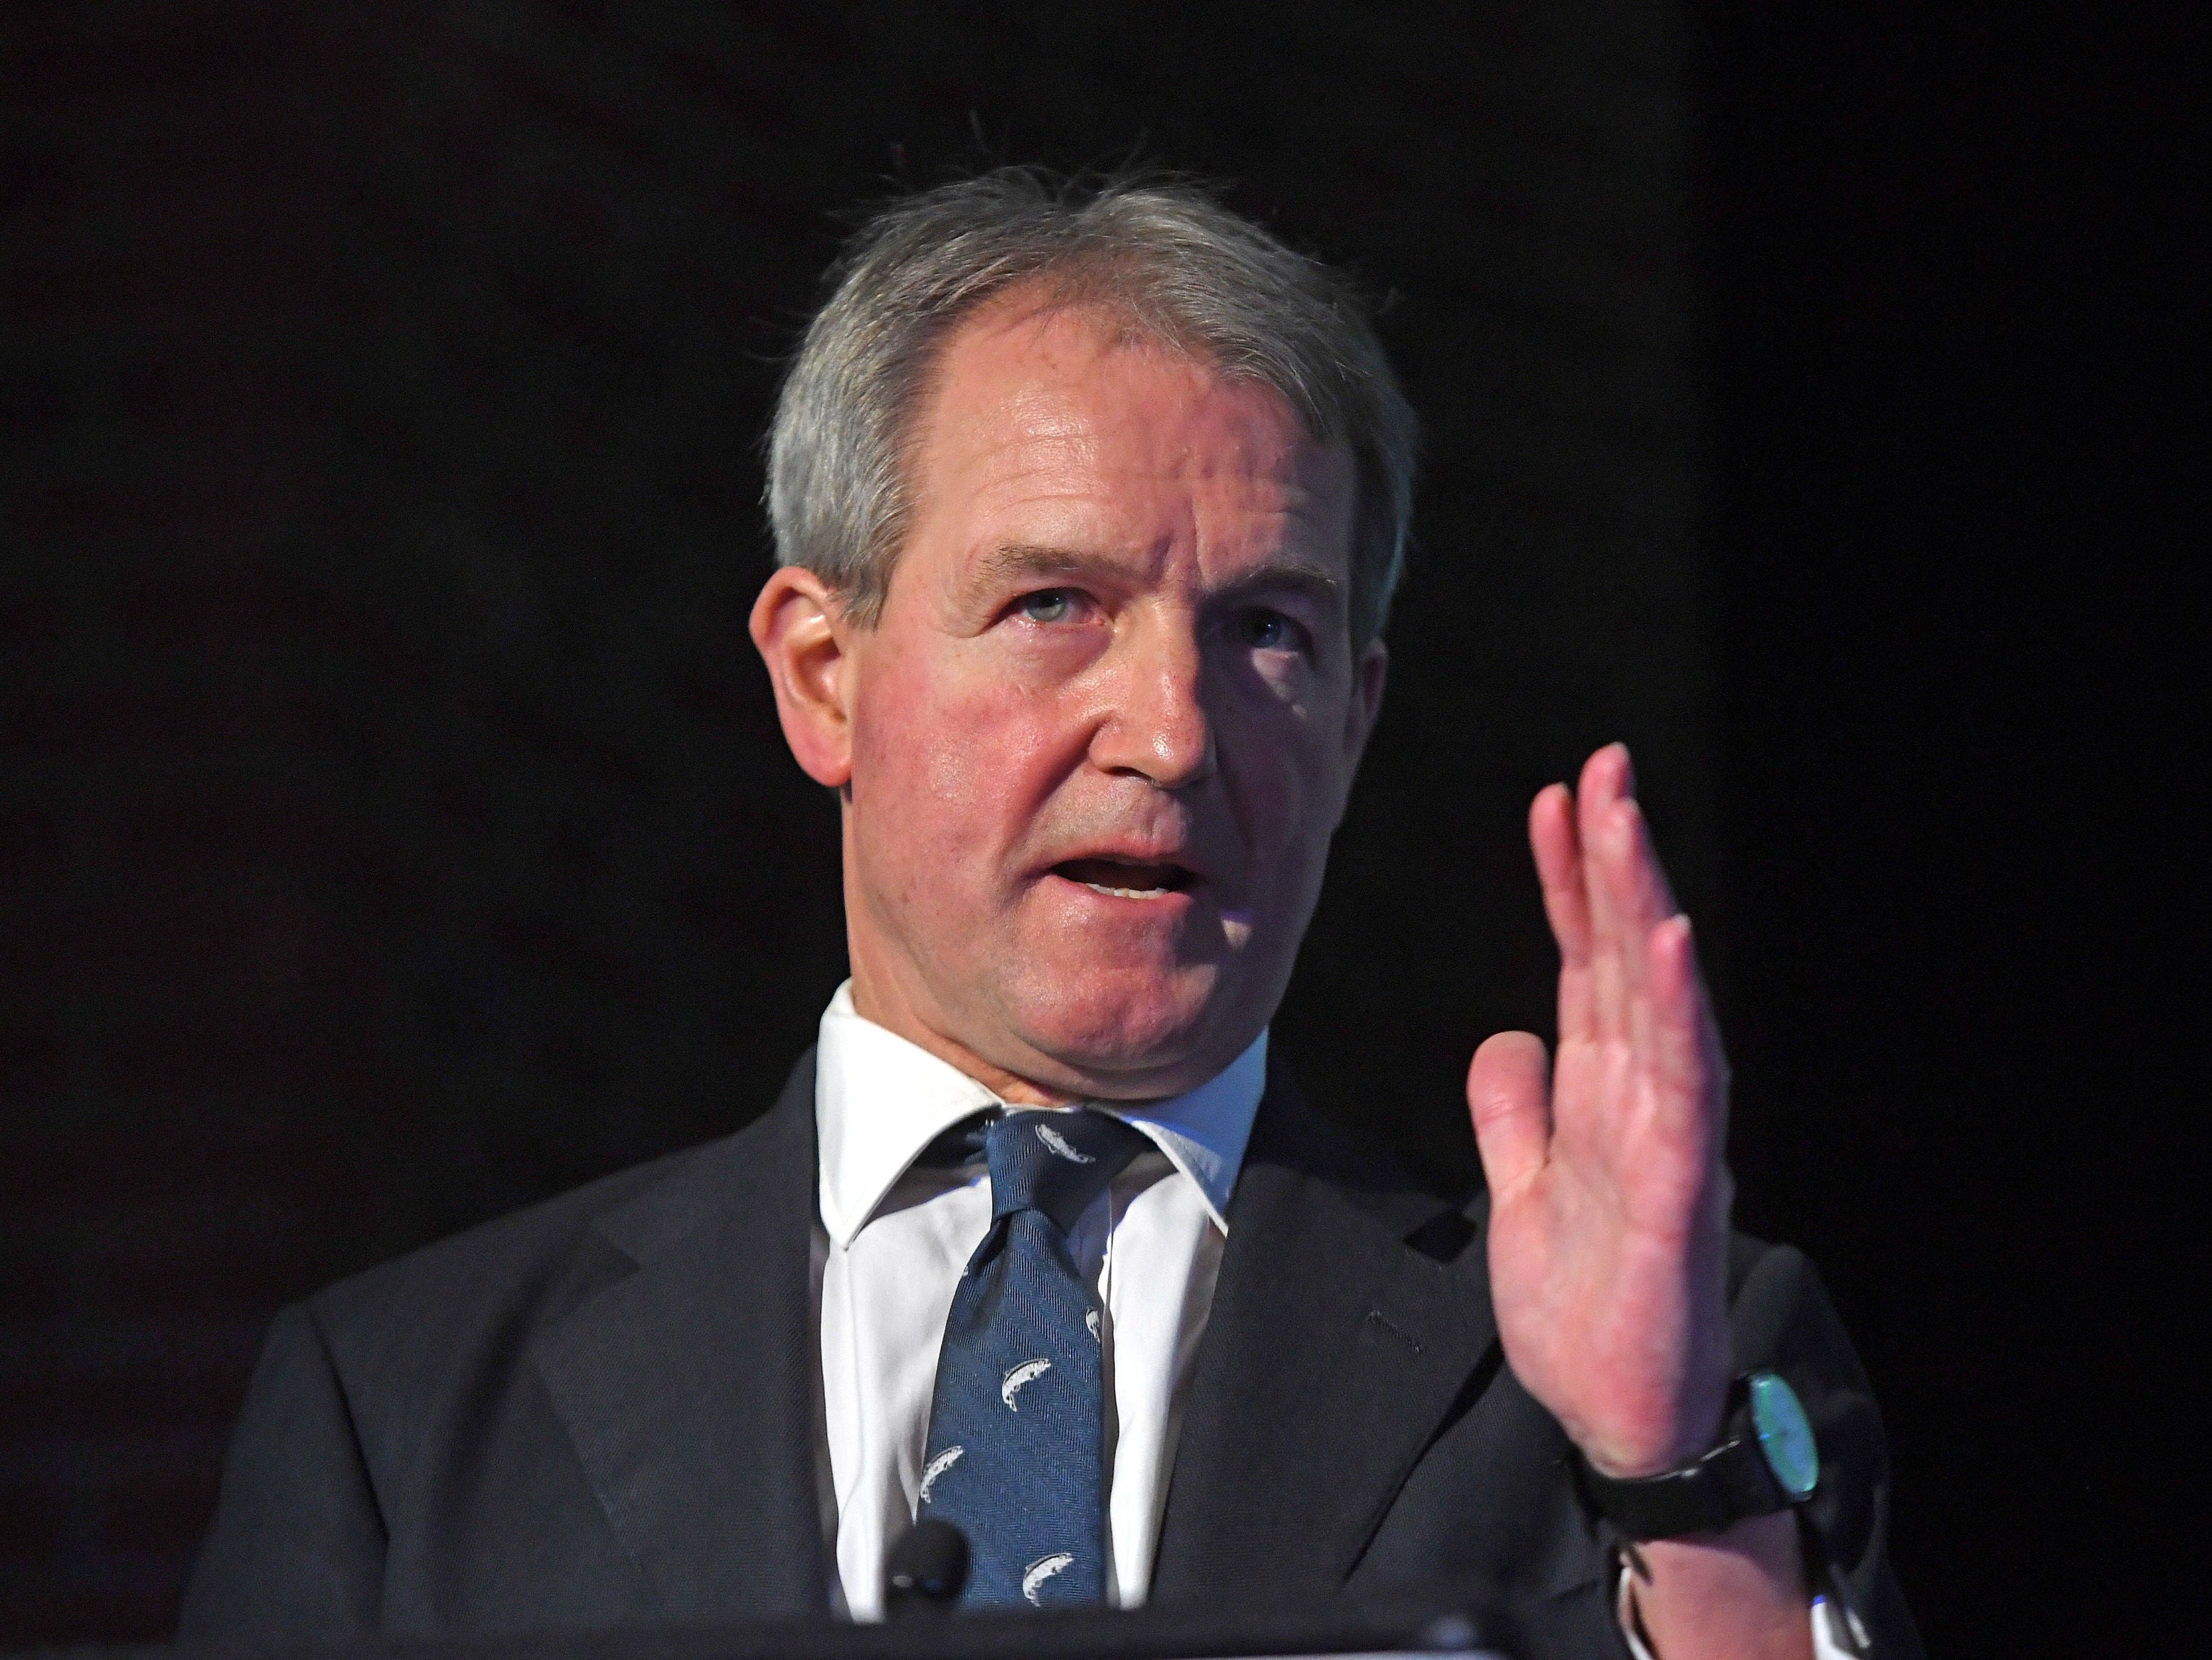 Owen Paterson has resigned as the Conservative MP for North Shropshire after 24 years